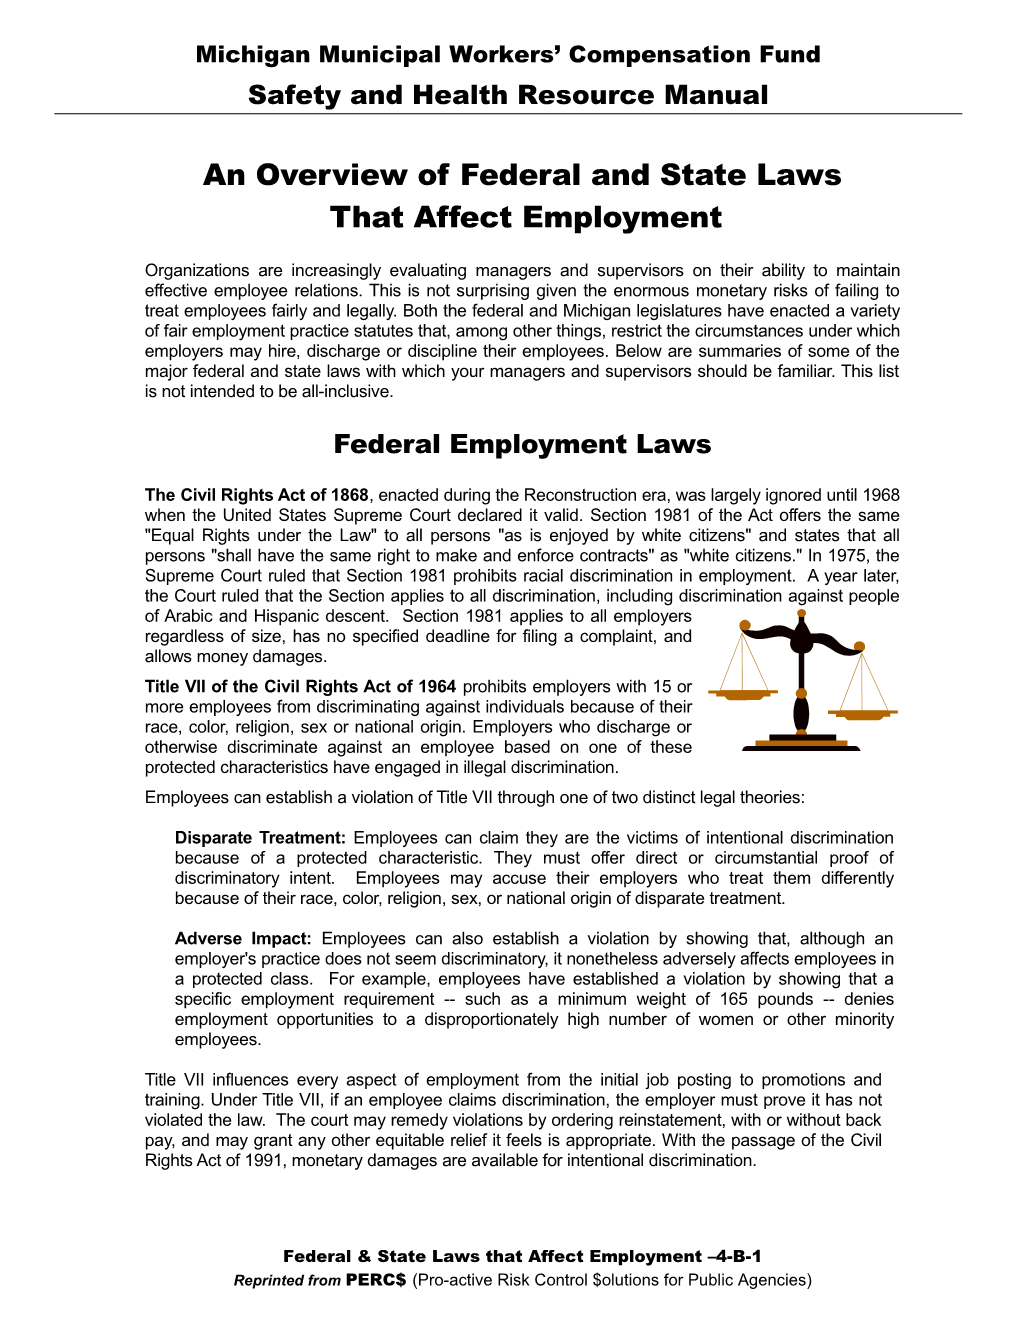 Federal & State Laws That Affect Employment 4-B-2